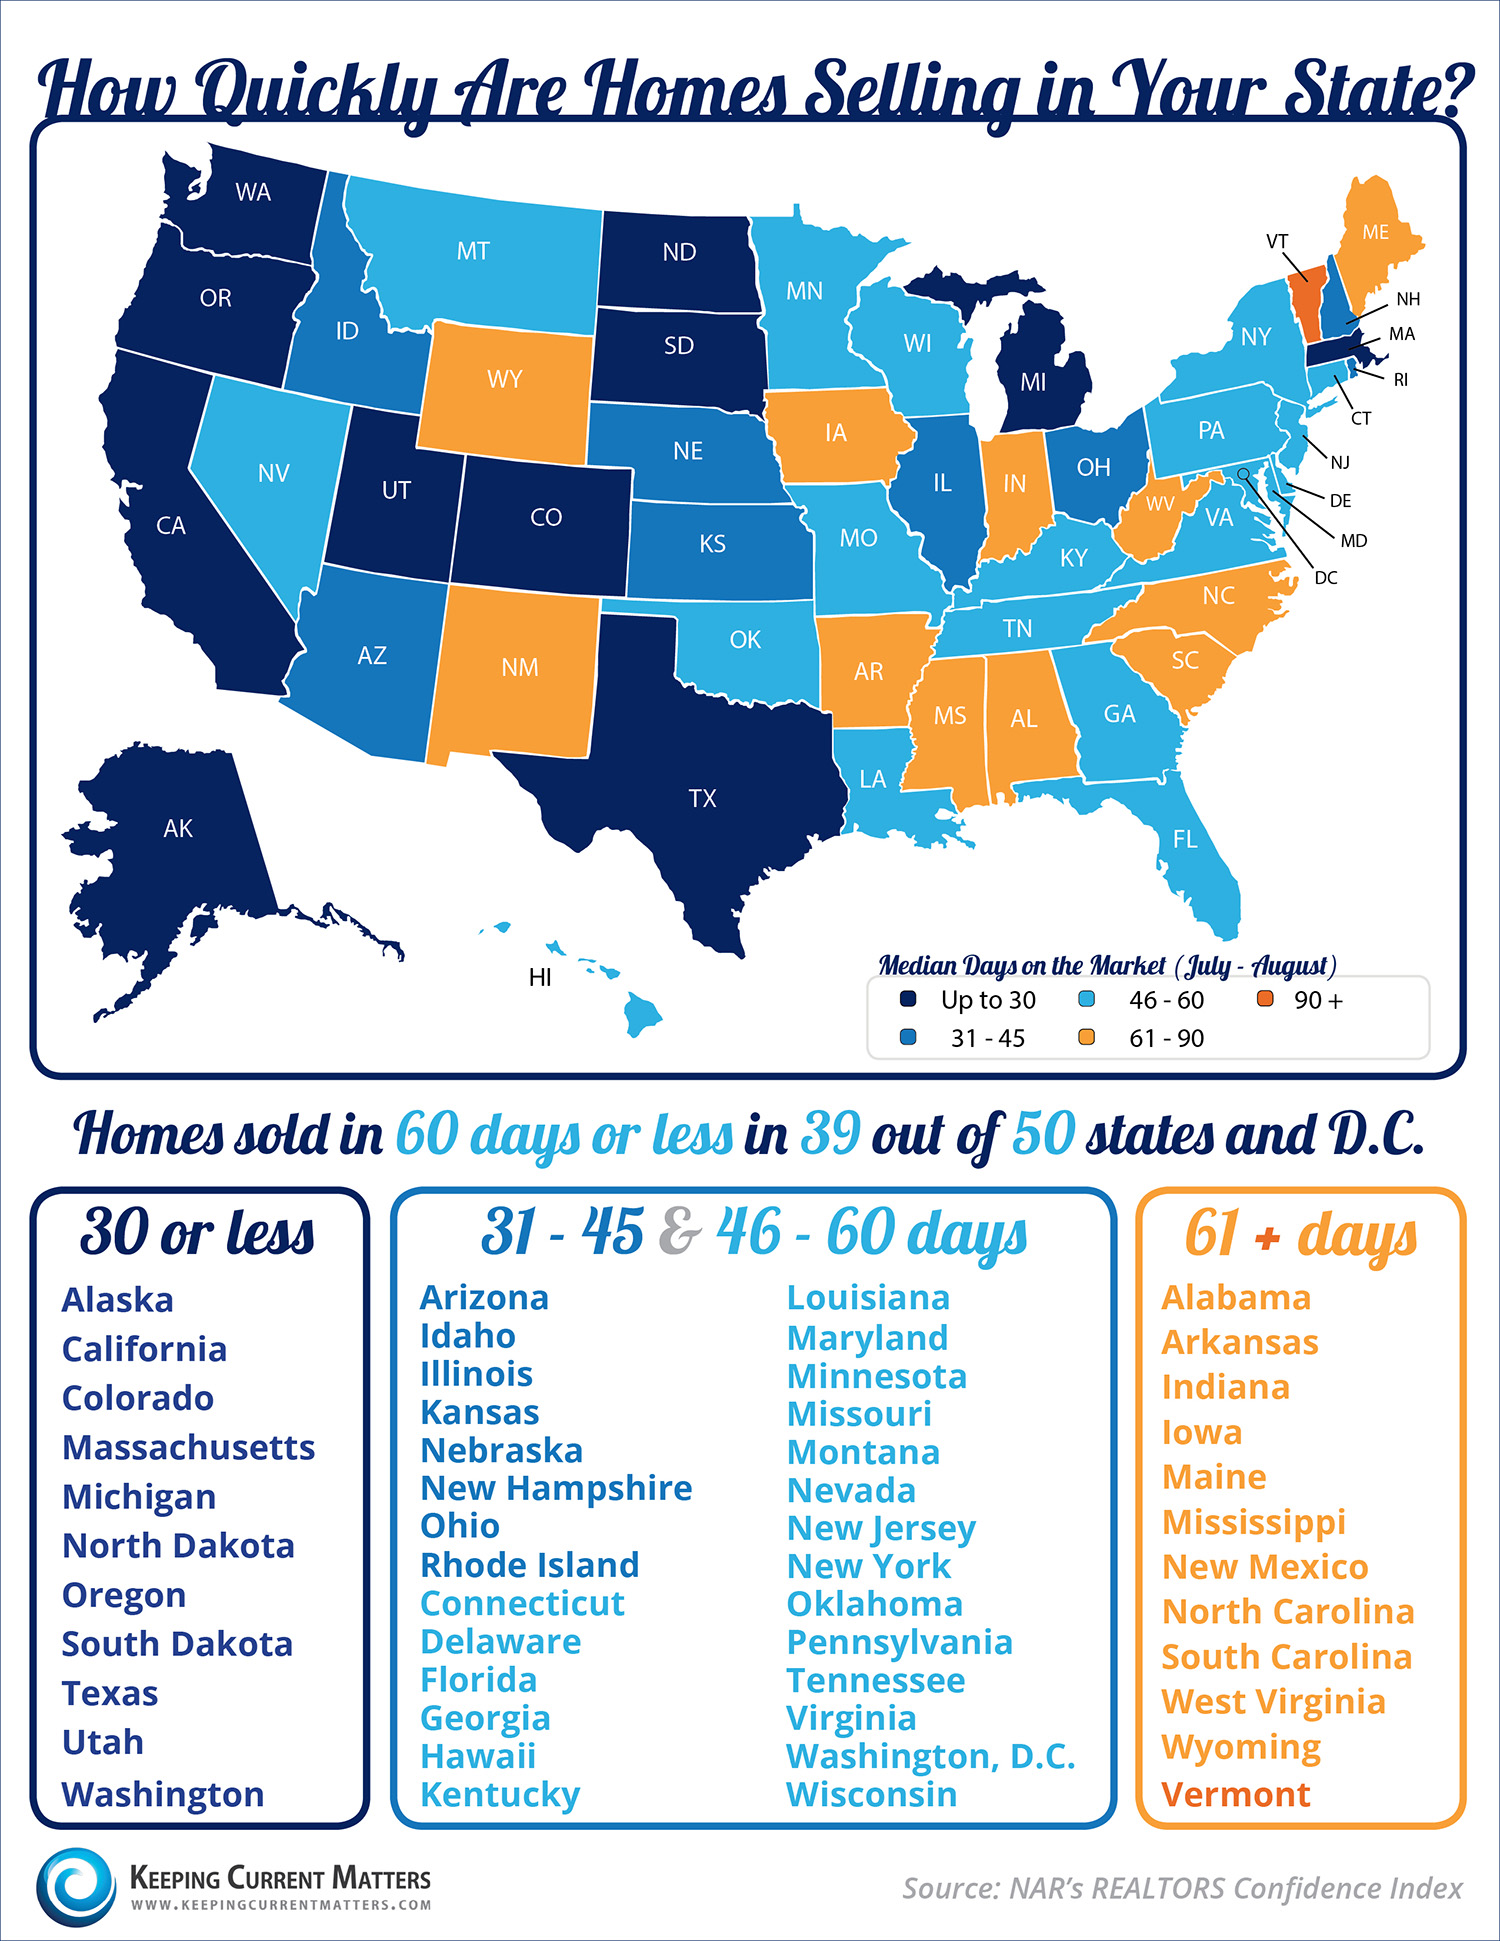 How Quickly Are Homes Selling In Your State? [INFOGRAPHIC] | Keeping Current Matters